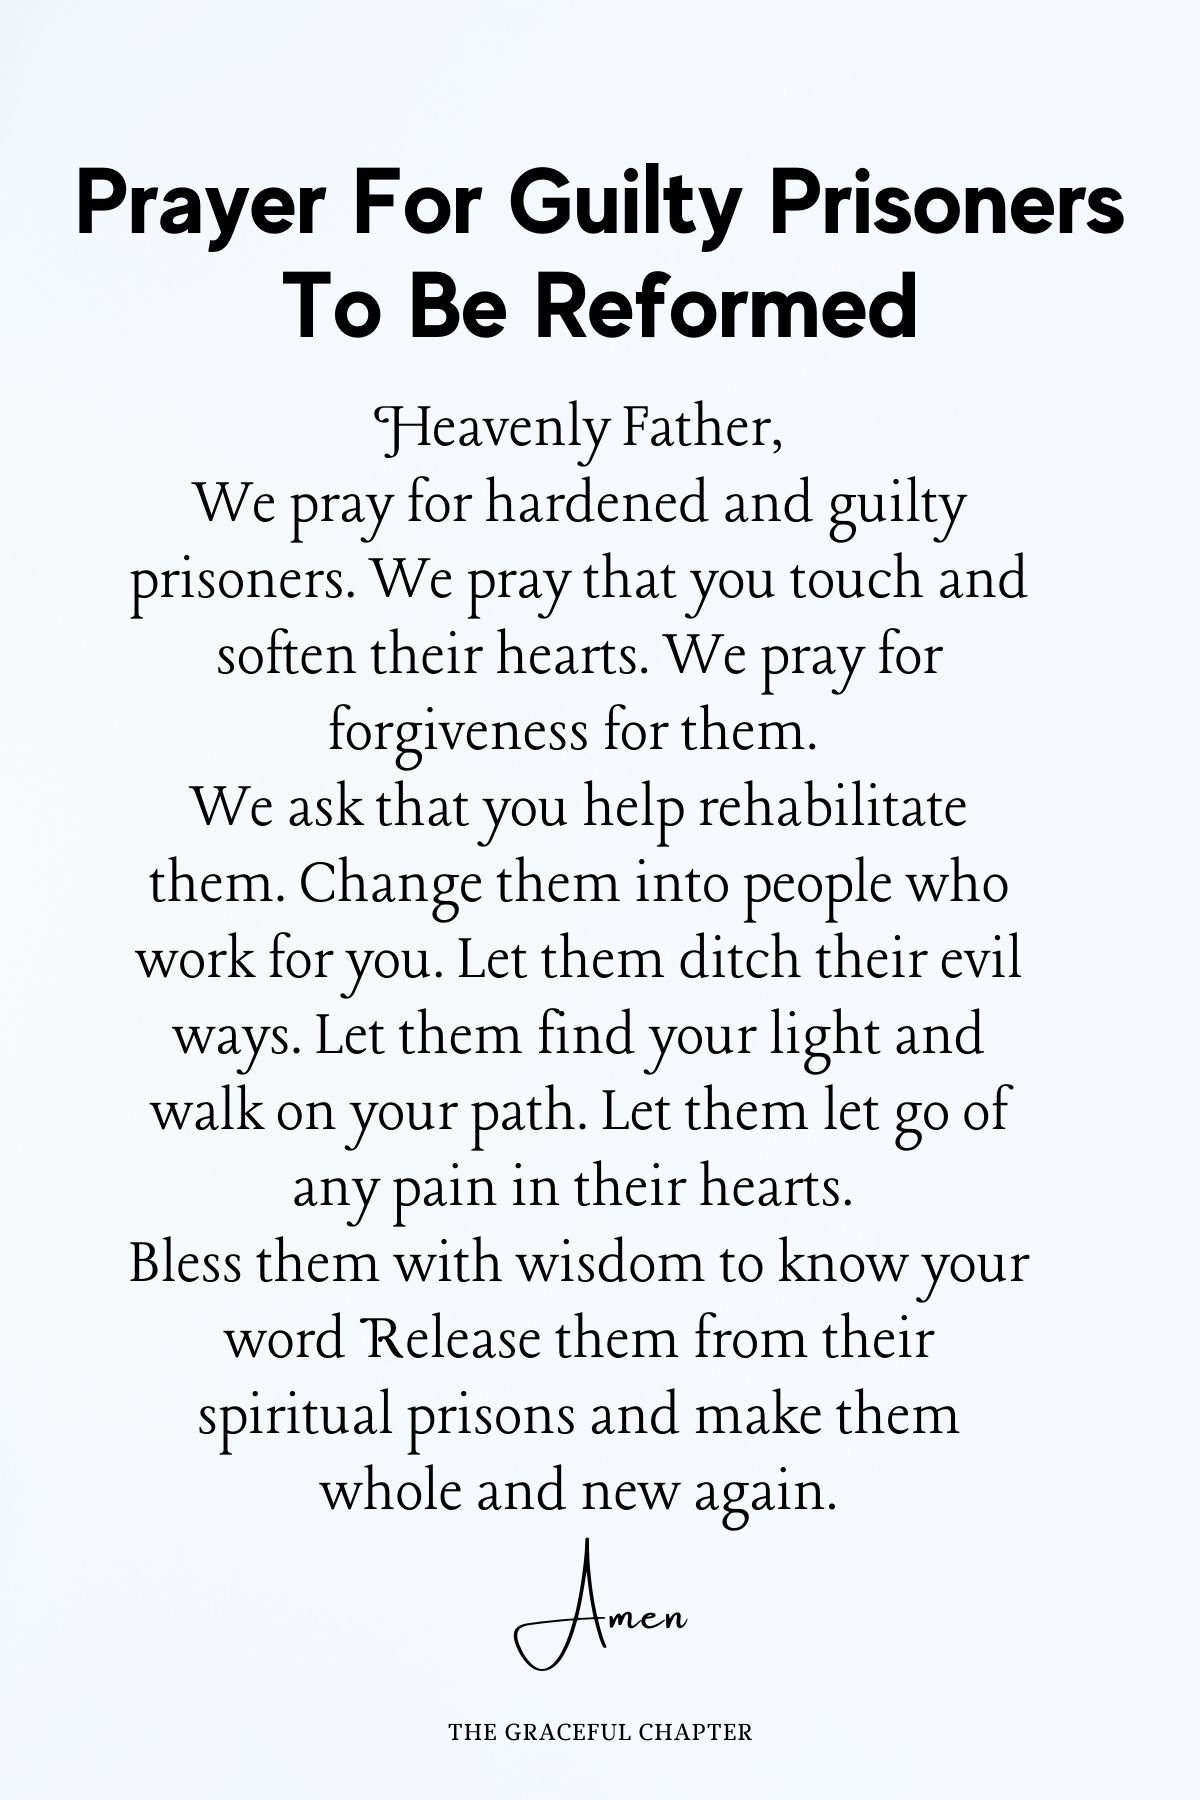 Prayer for guilty prisoners to be reformed